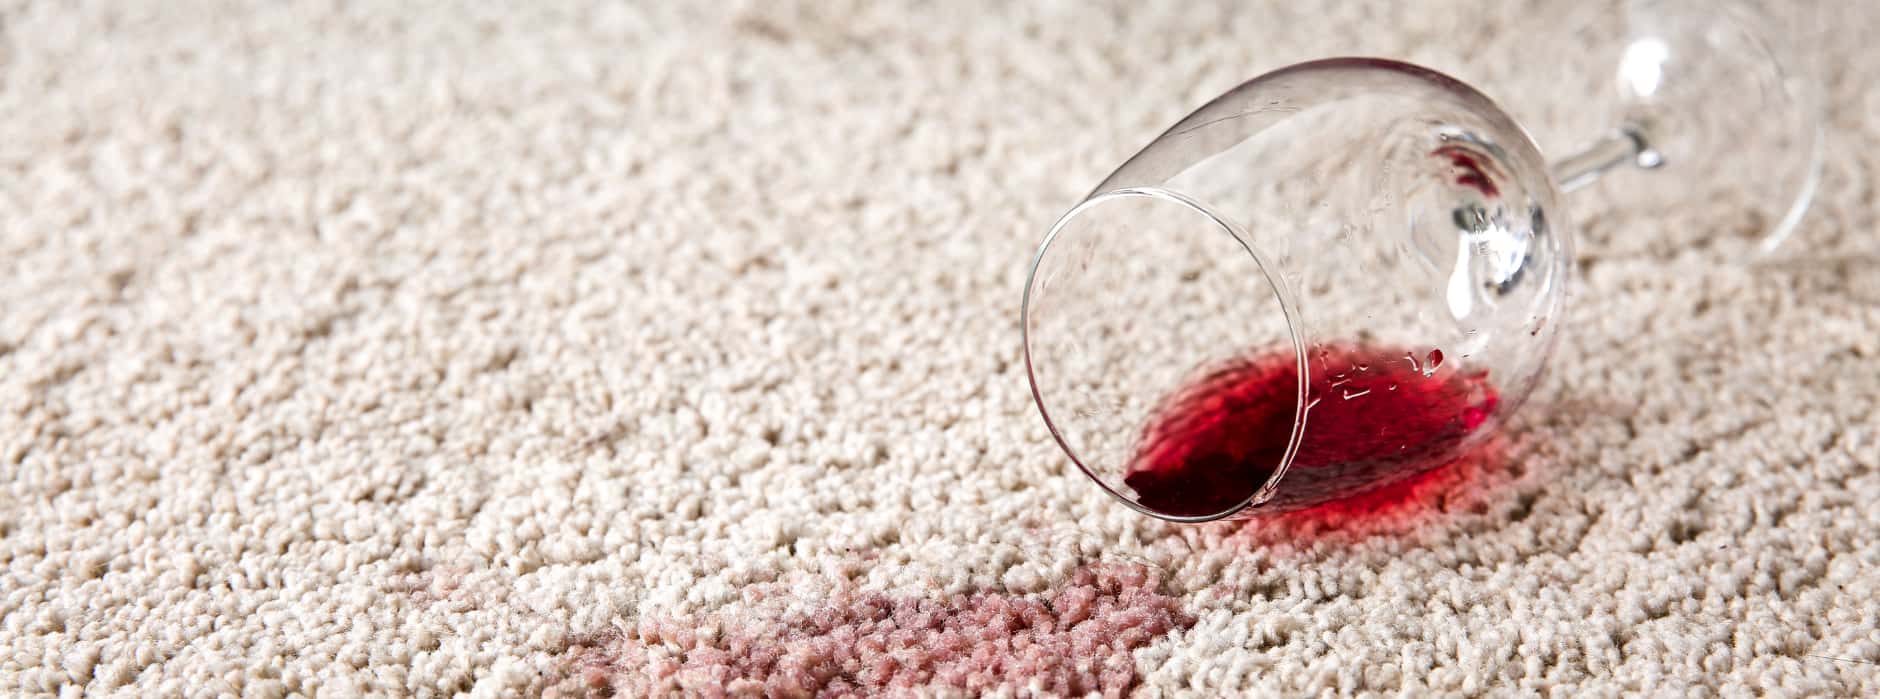 This is a photo of St Paul's Cray Carpet Cleaning red wine which has been spilt on a cream carpet. The glass is on its side.